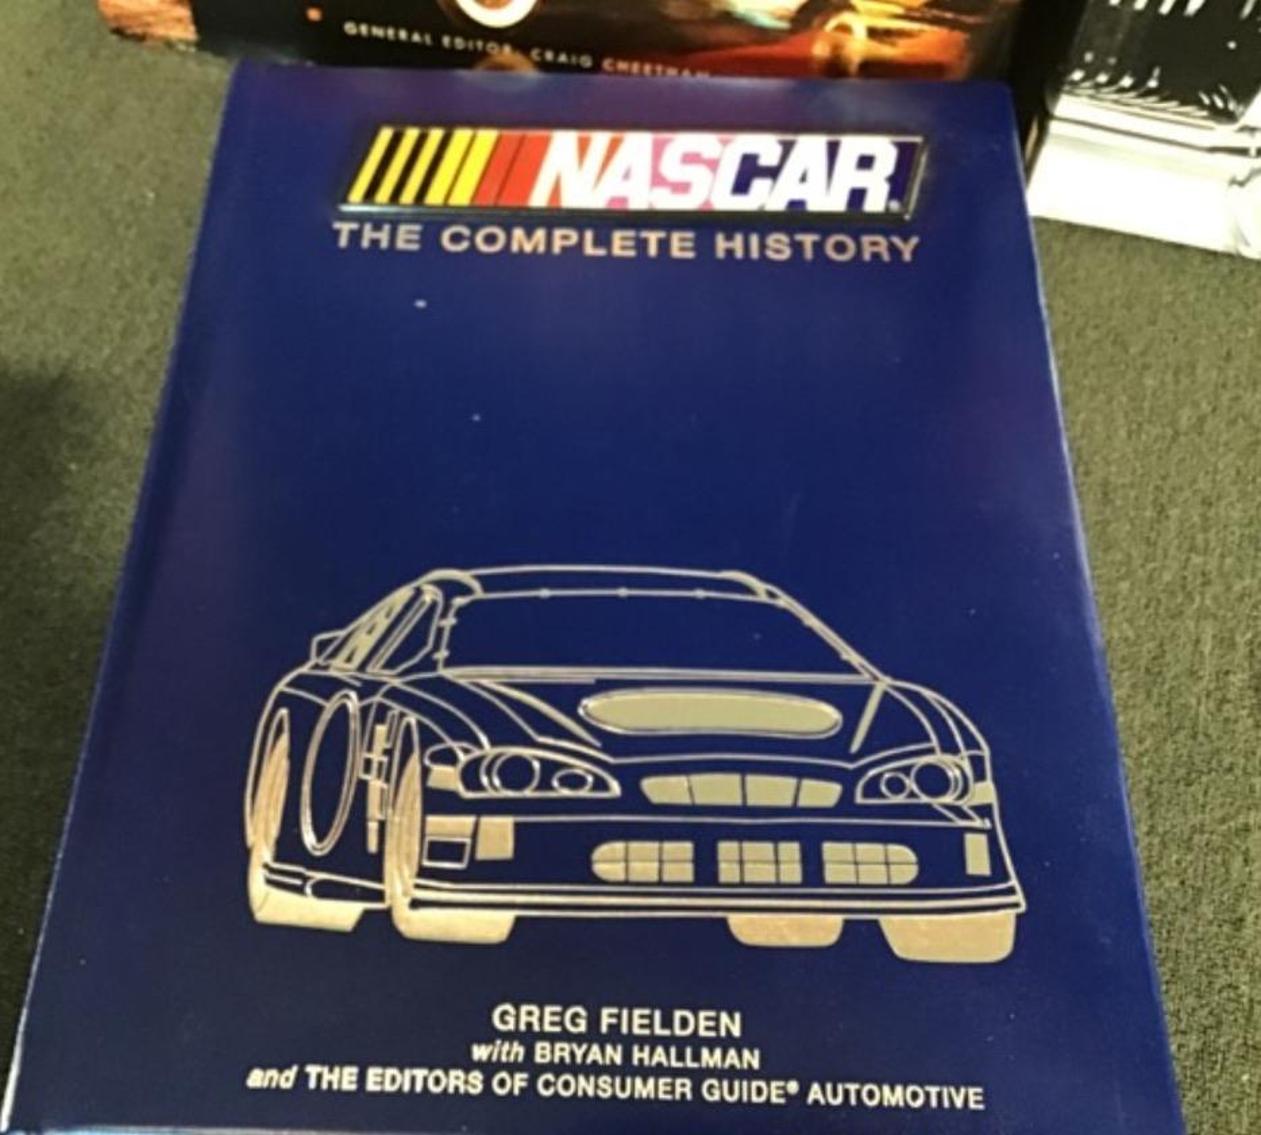 Image for Car And Nascar Books